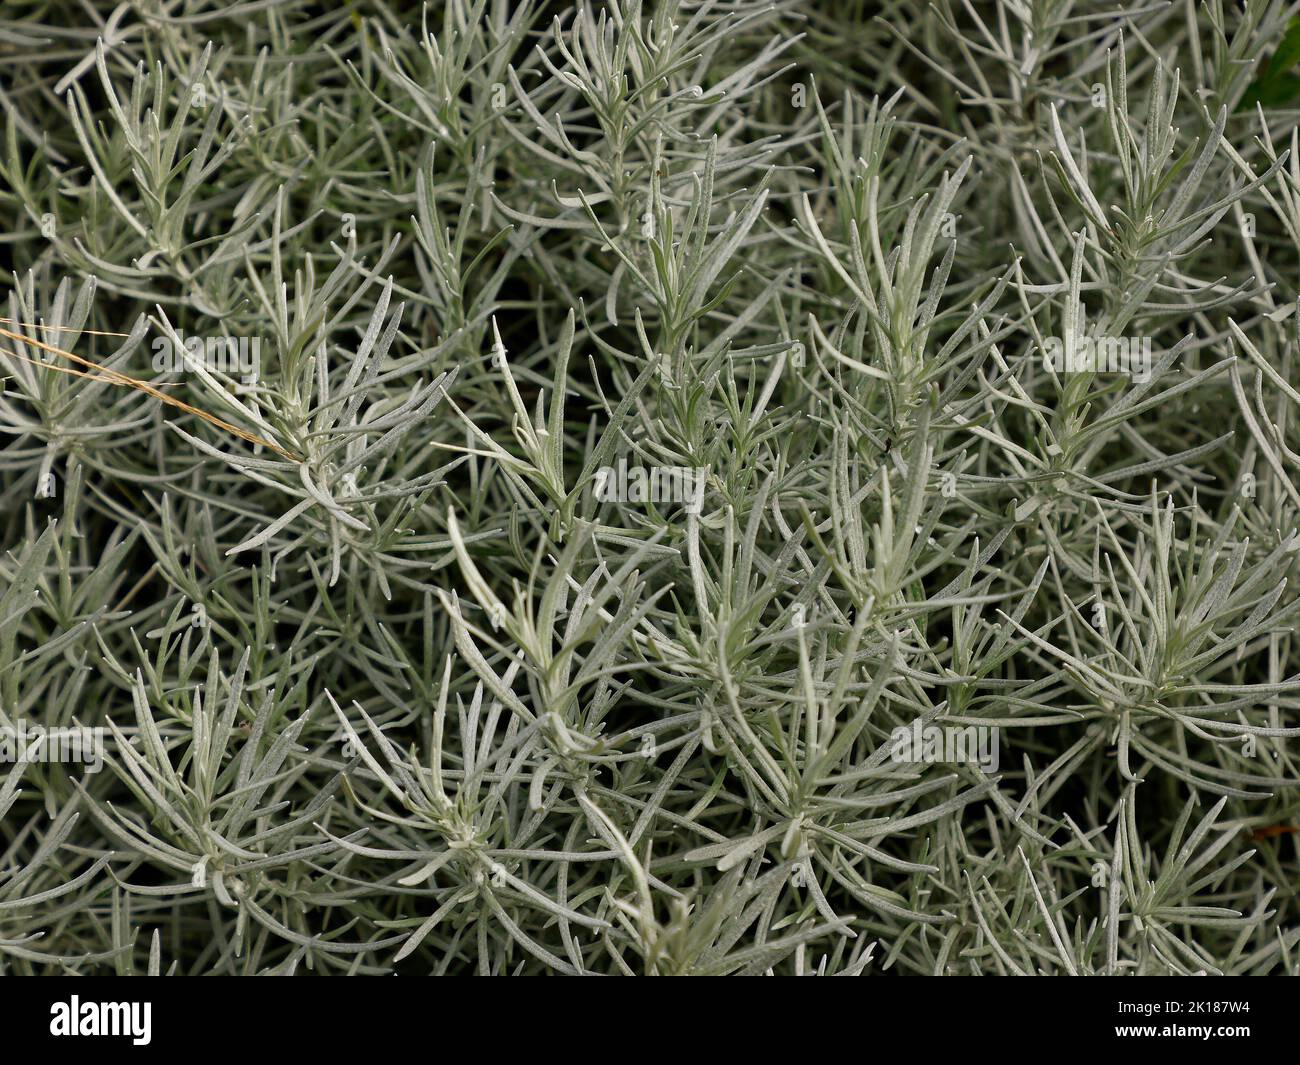 Close up of the evergreen silvery leaves of the garden plant Helichrysum Italicum or Curry Plant. Stock Photo